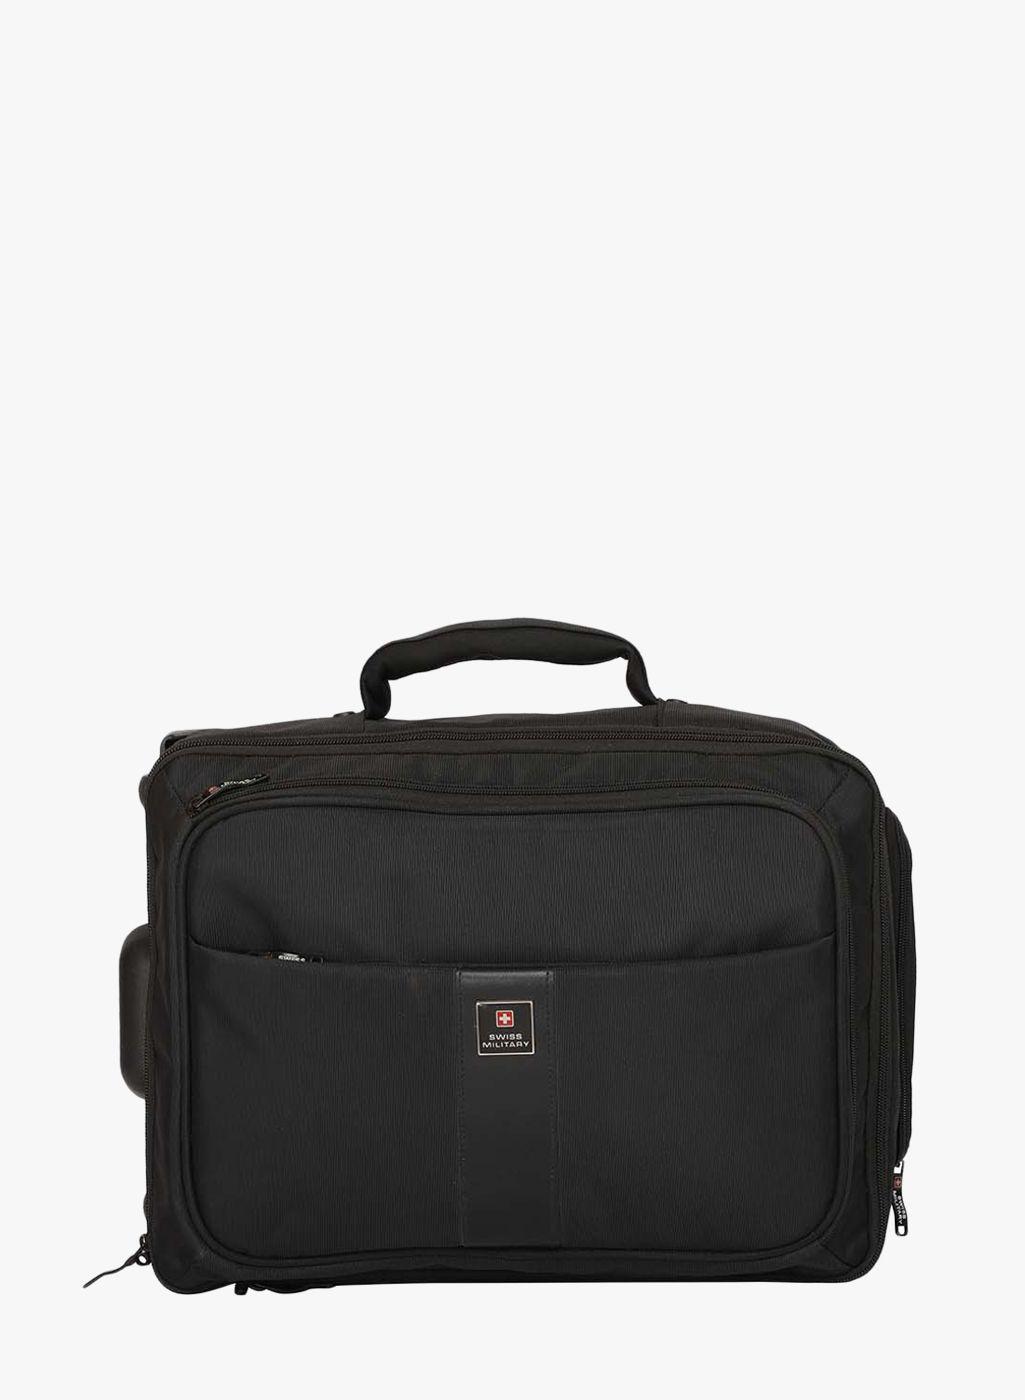 swiss military solid laptop trolley briefcase